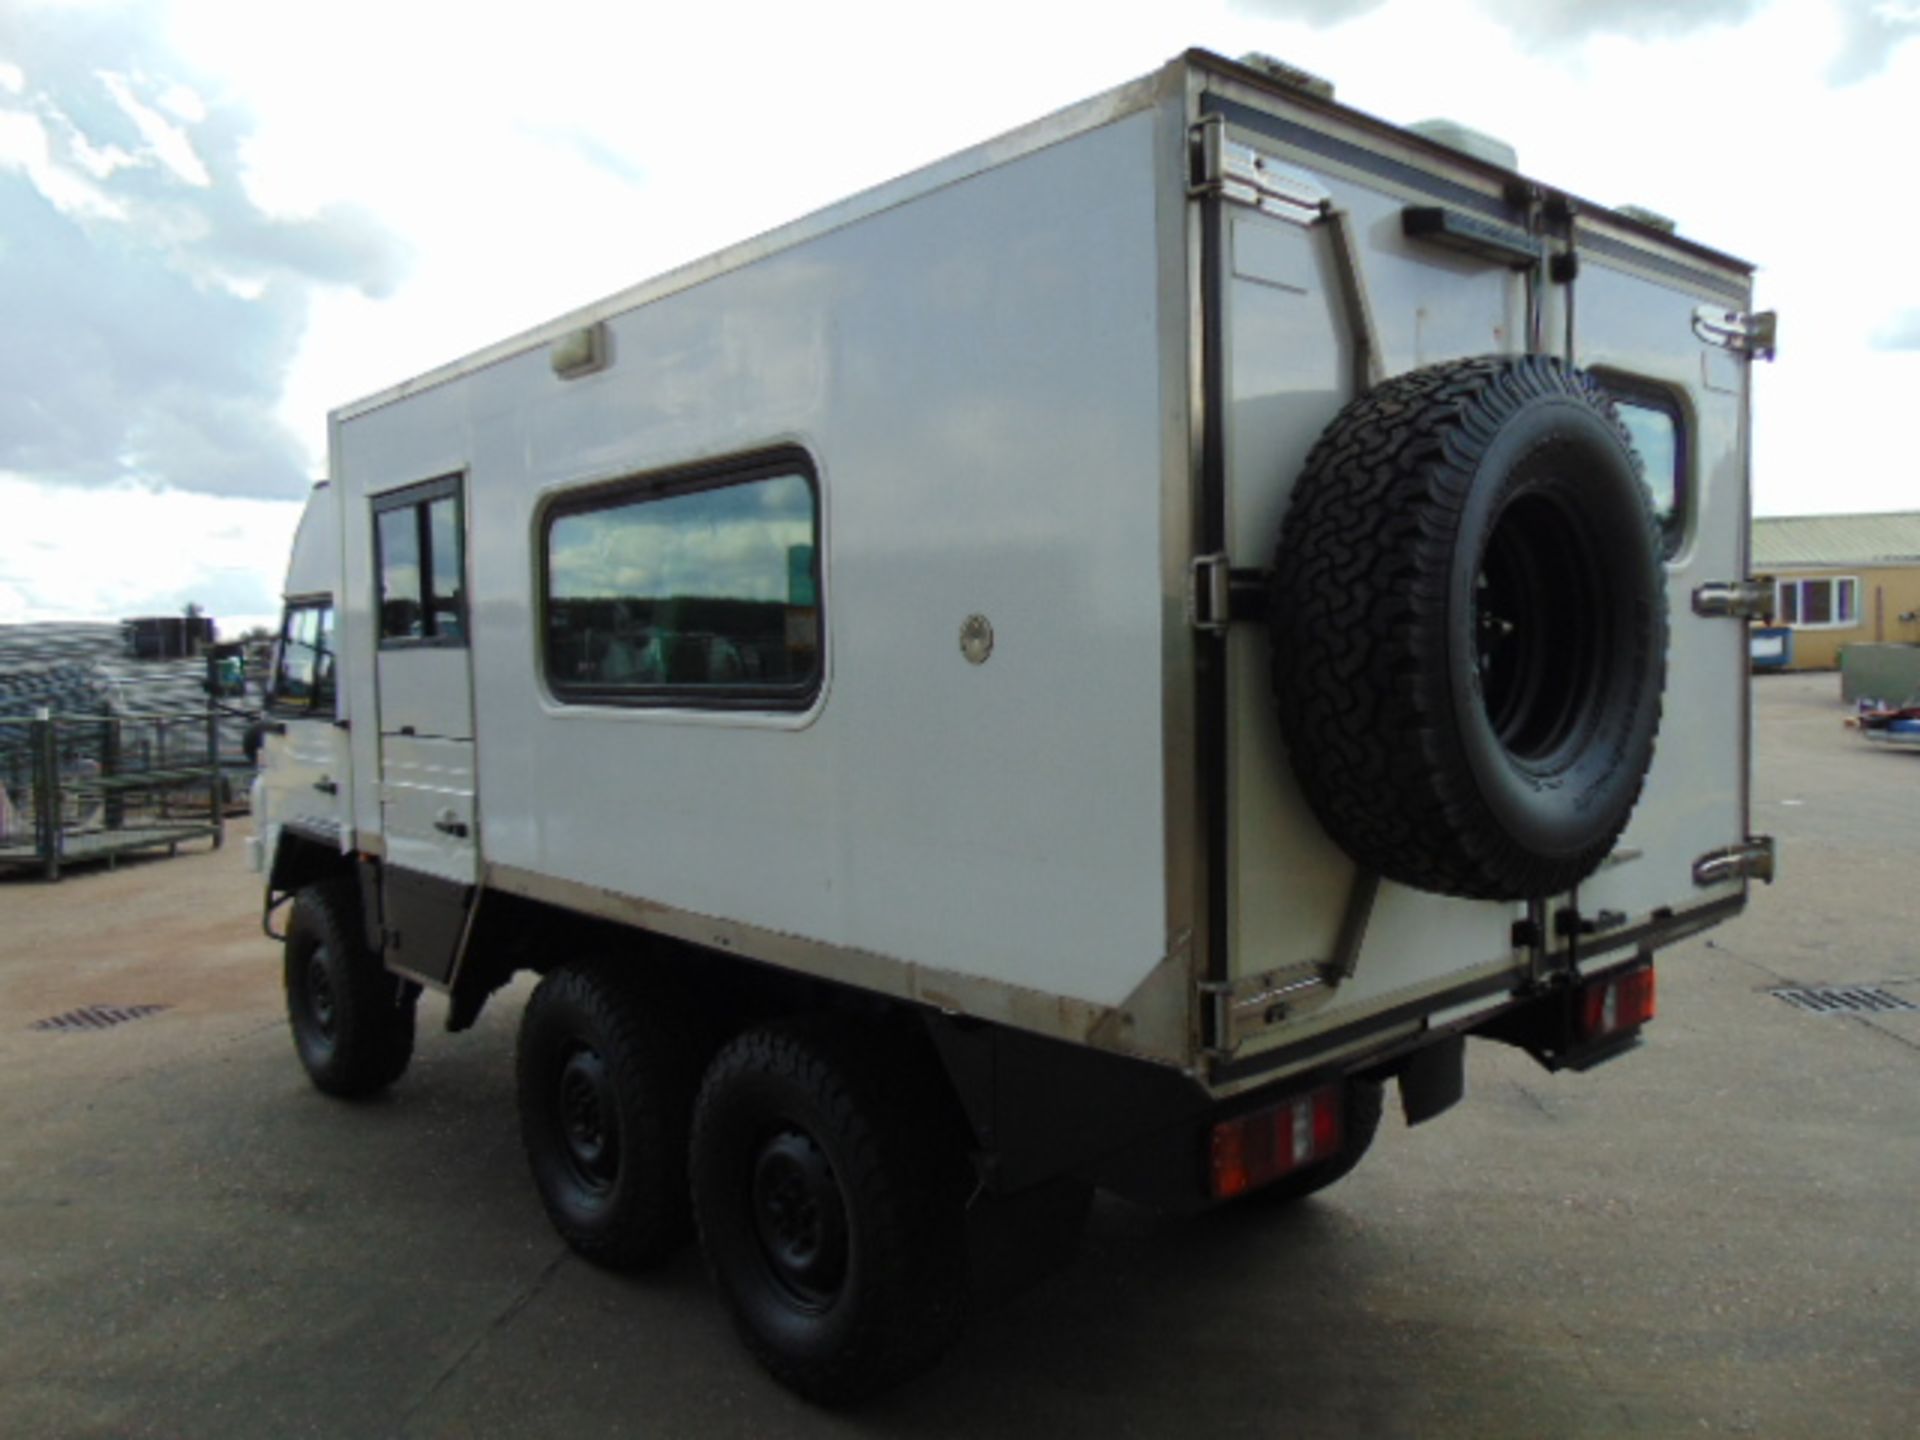 Military Specification Pinzgauer 718 6X6 ONLY 23,750 MILES! - Image 8 of 52